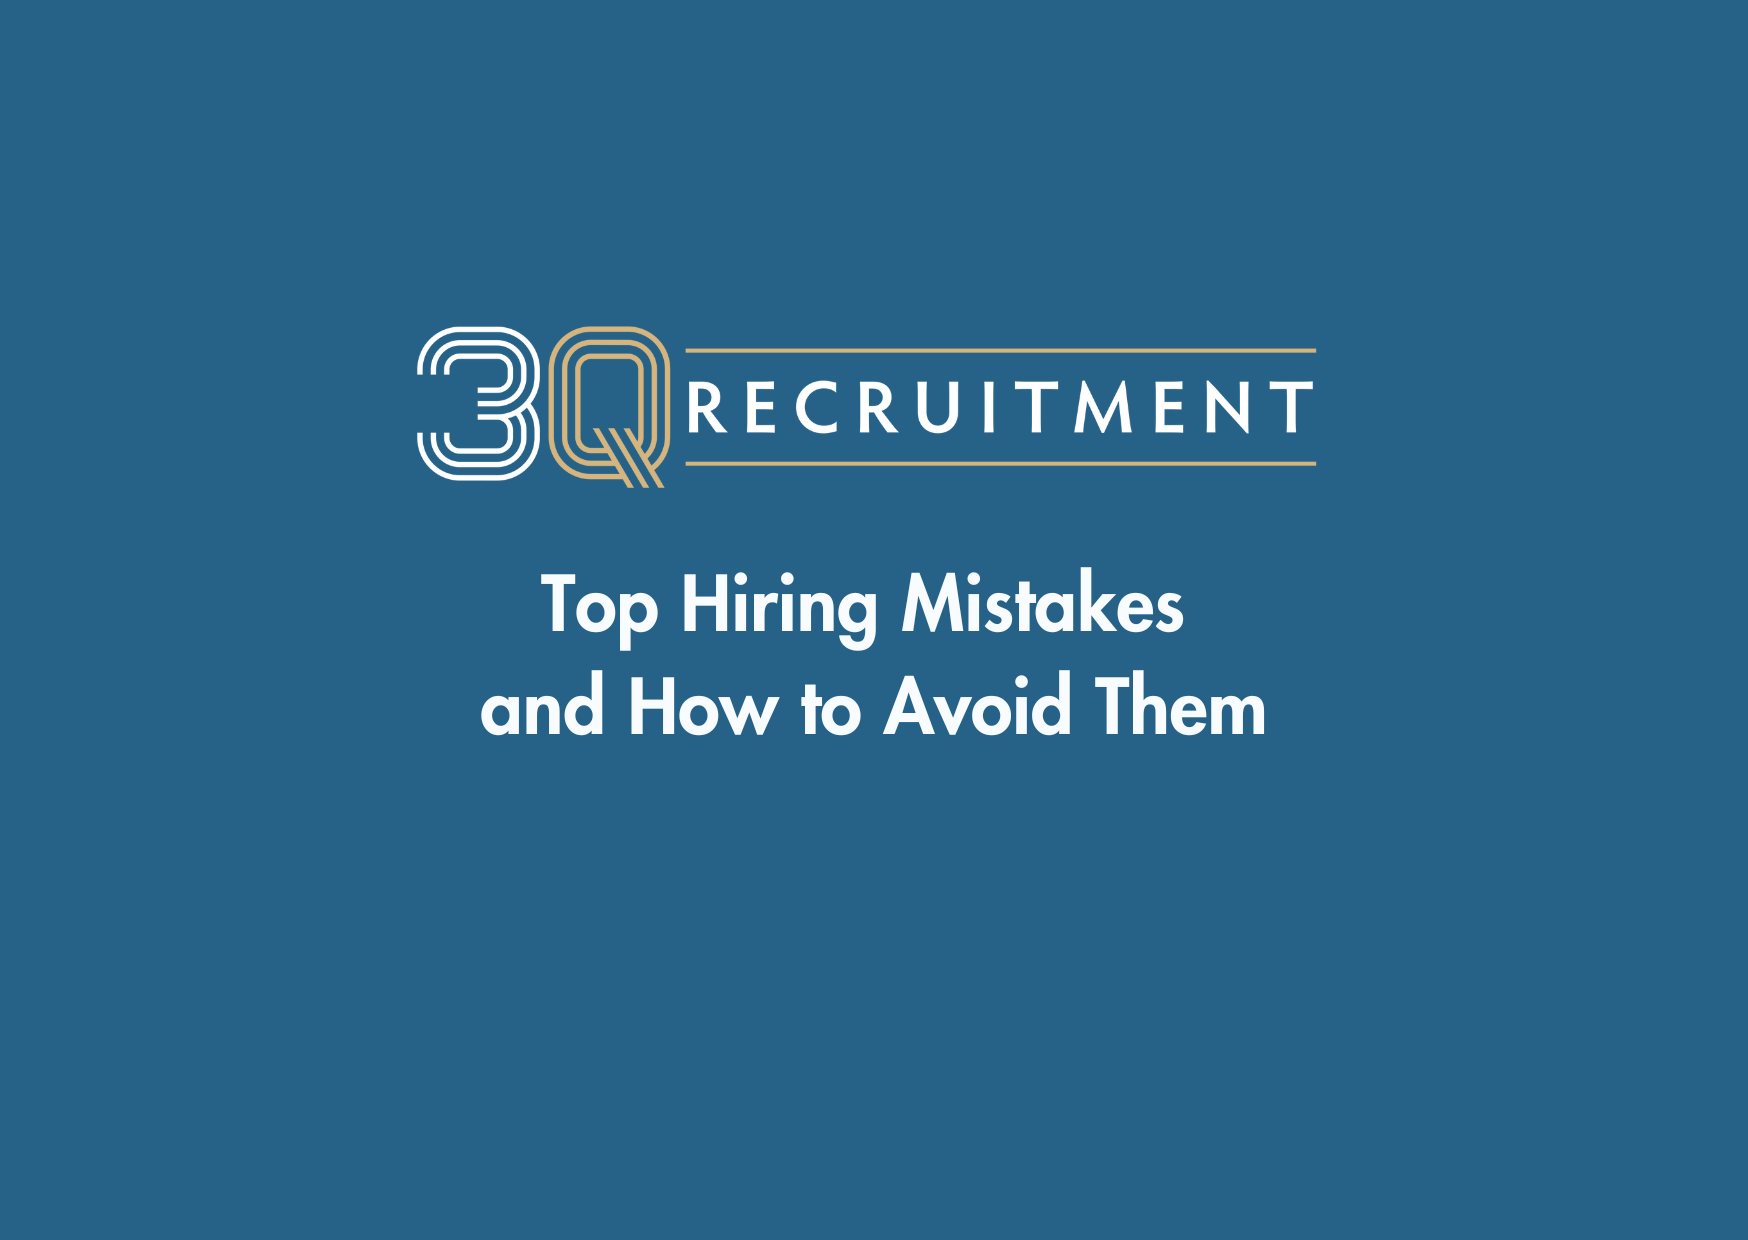 3Q Recruitment Top Hiring Mistakes and How to Avoid Them